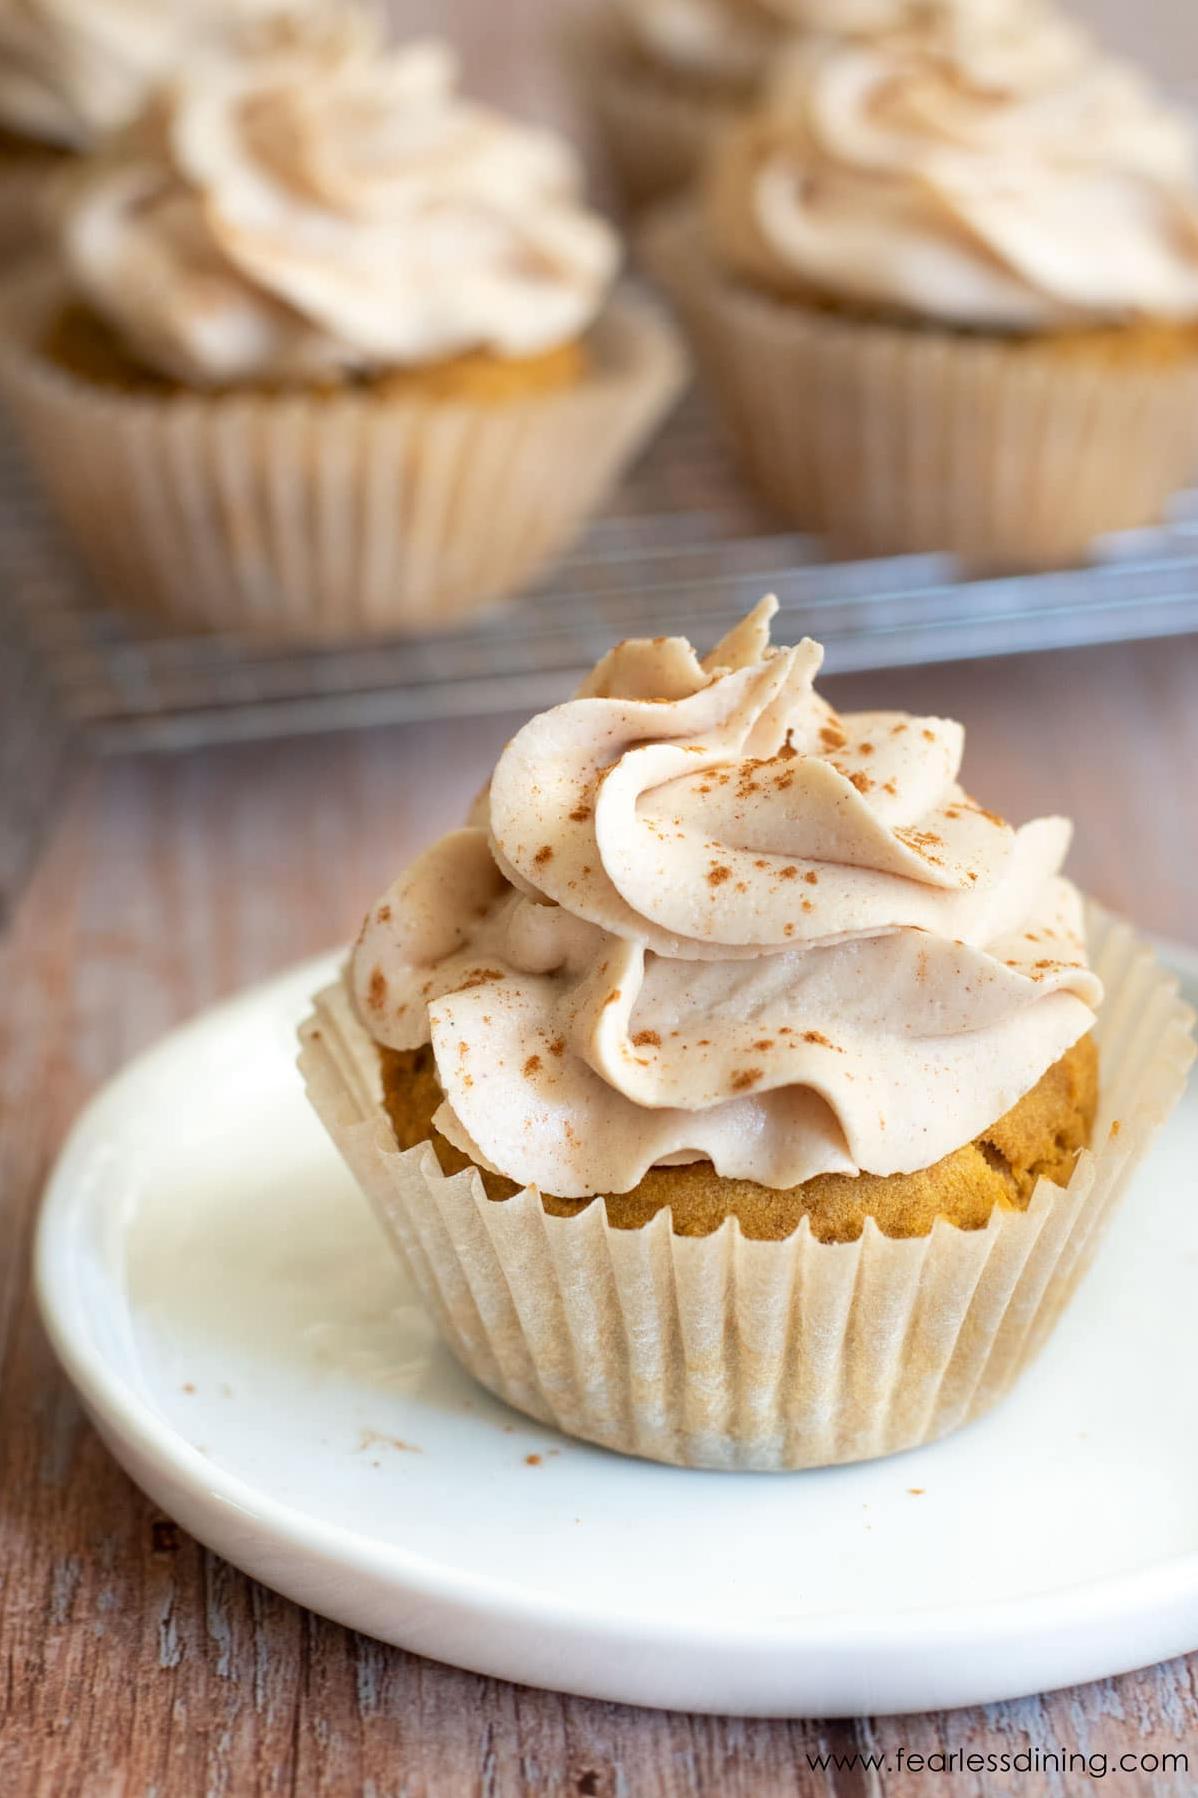  Get ready for pumpkin spice overload with these yummy gluten-free cupcakes